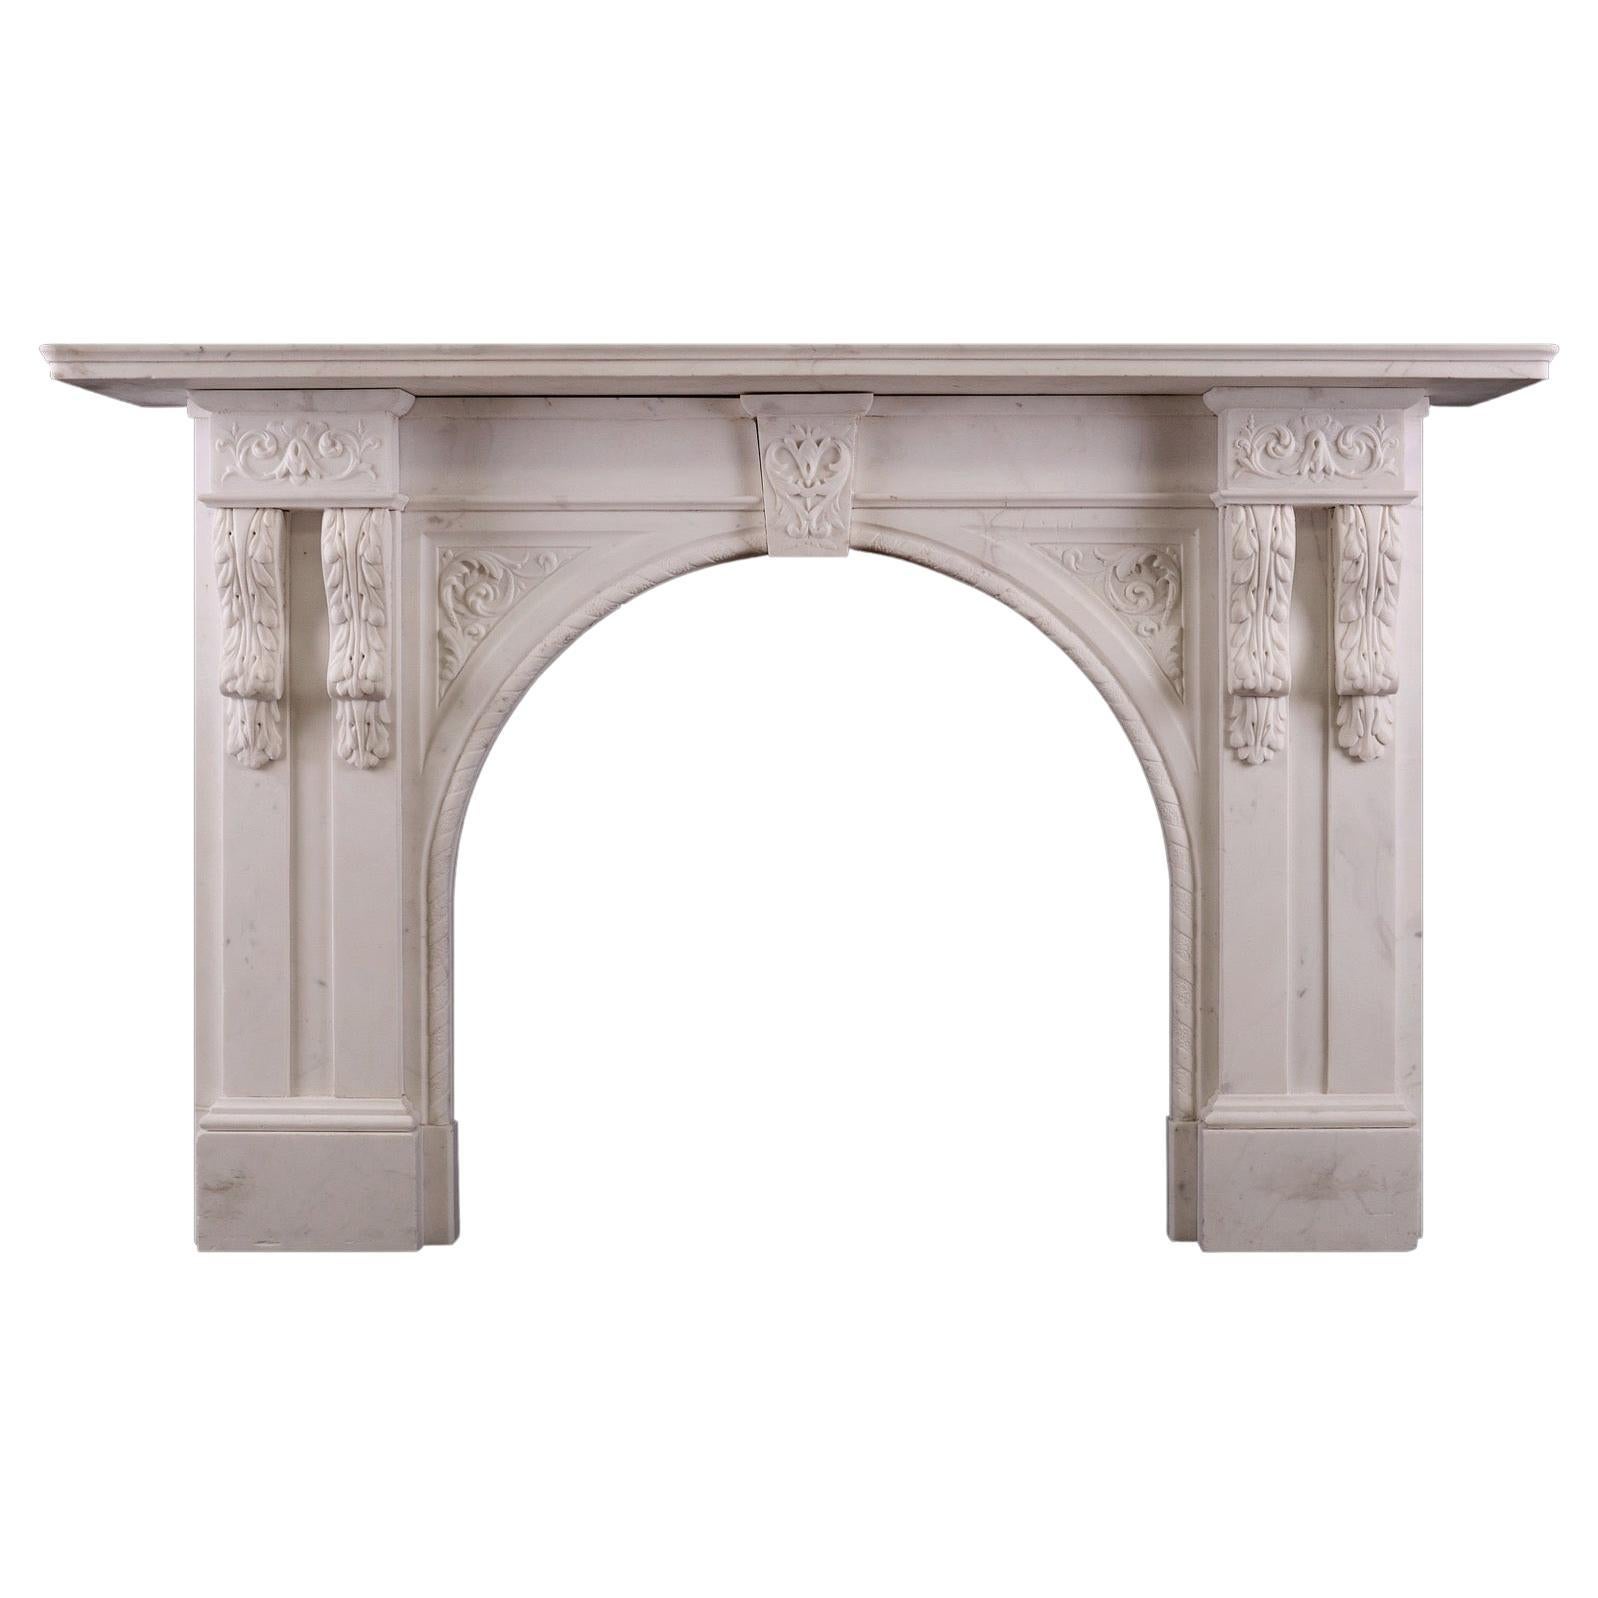 Carved Arched Marble Fireplace For Sale